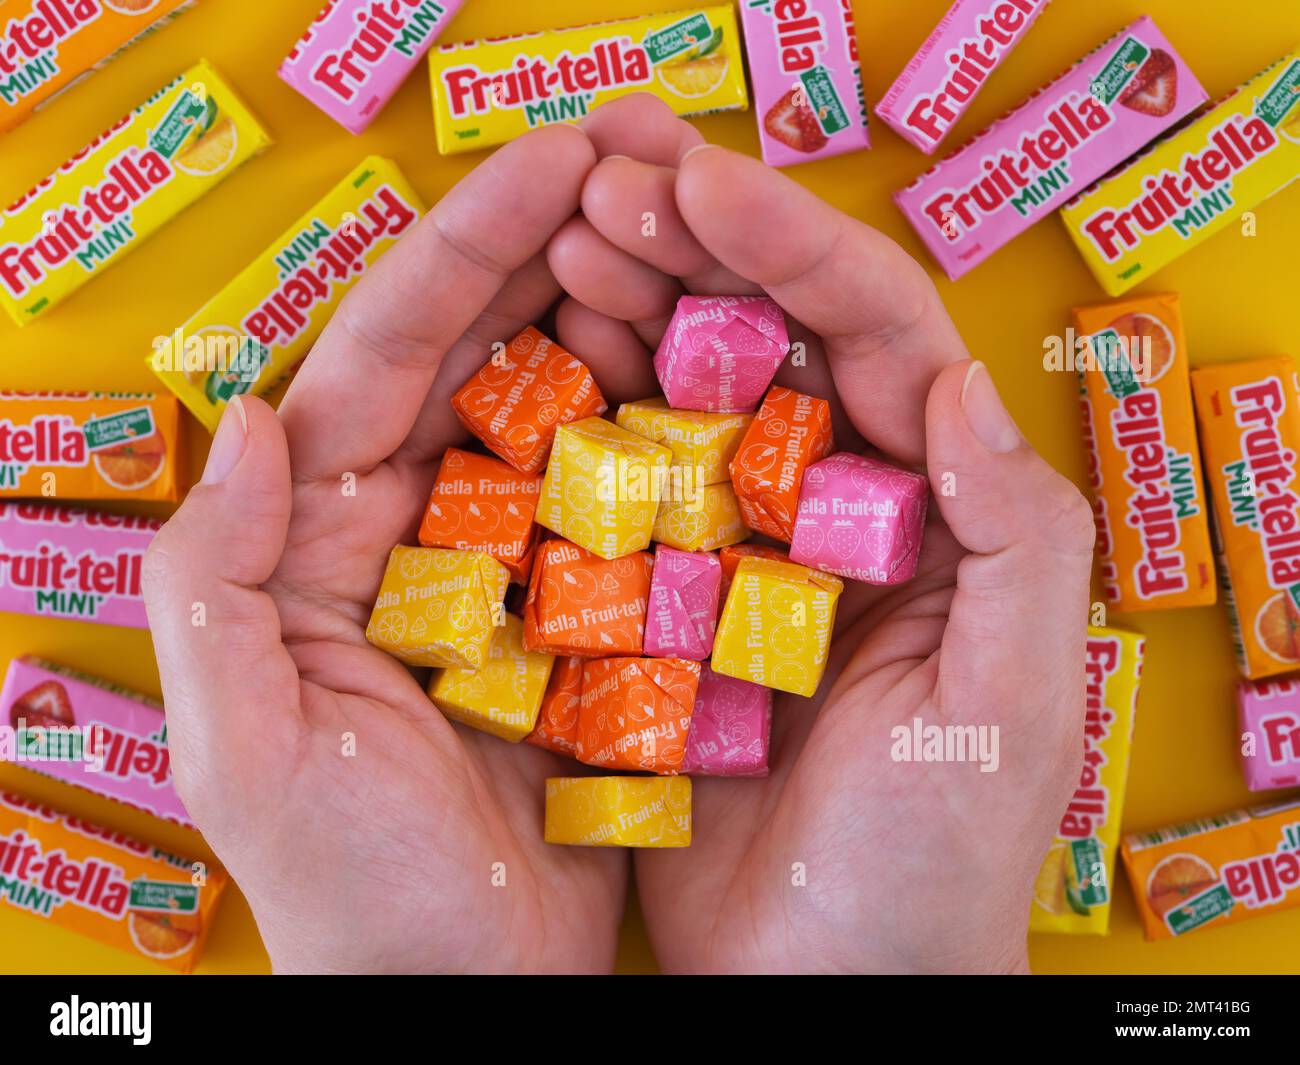 https://c8.alamy.com/comp/2MT41BG/tambov-russian-federation-january-22-2023-a-woman-holding-a-pile-of-different-flovoured-fruit-tella-candies-over-a-background-of-fruitella-mini-pa-2MT41BG.jpg